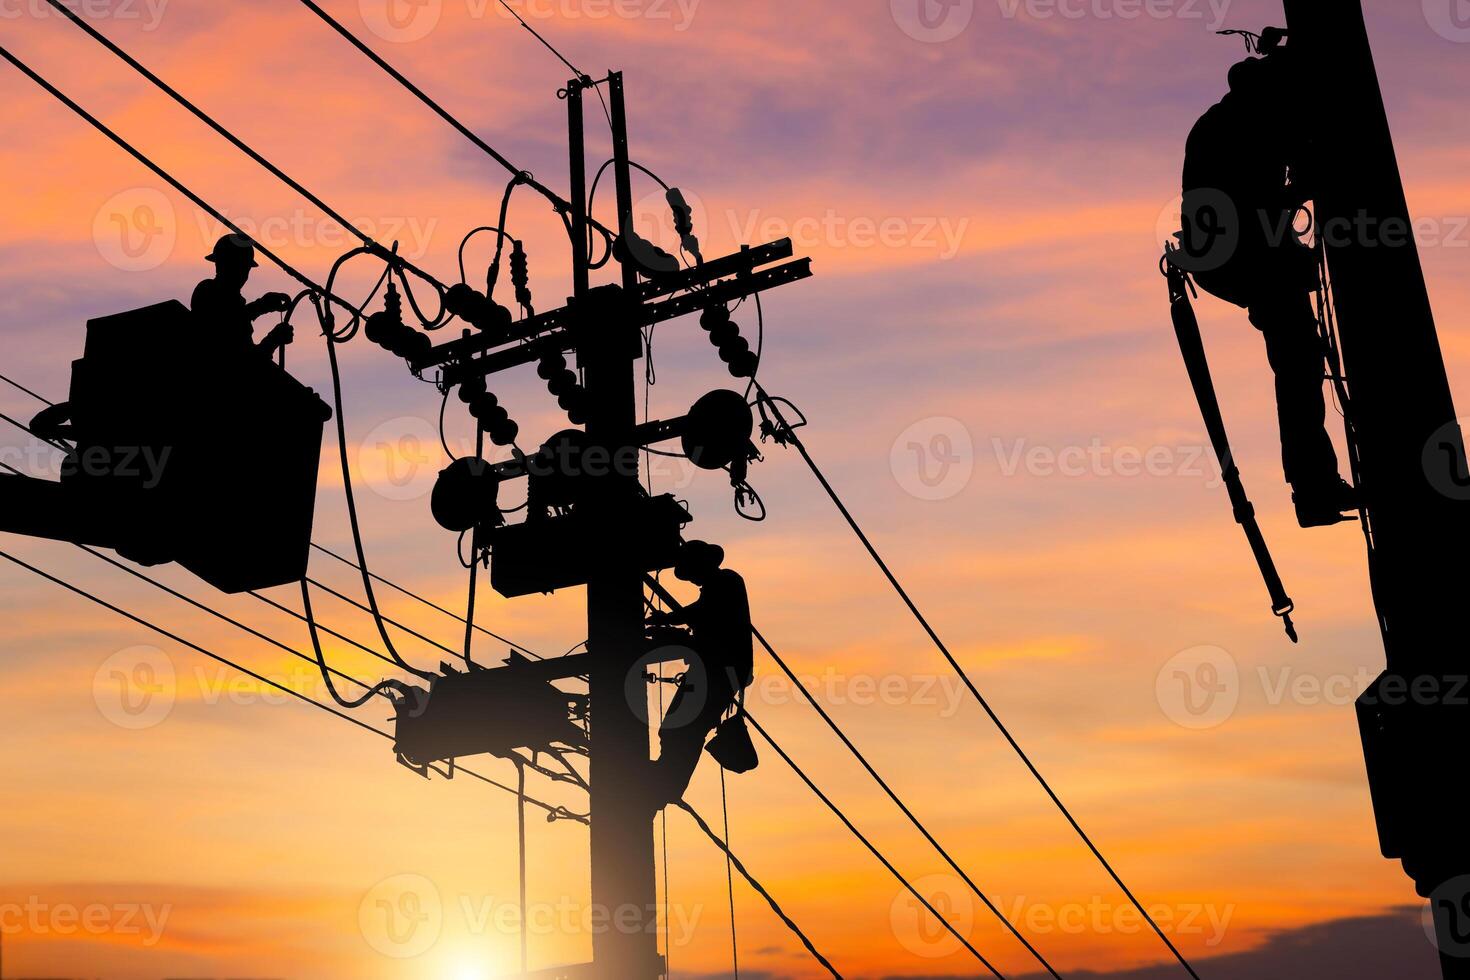 Silhouette of Electrician officer team climbs a pole and using a cable car  to maintain a high voltage line system, Electrician lineman worker at  climbing work on electric post power pole 39247719